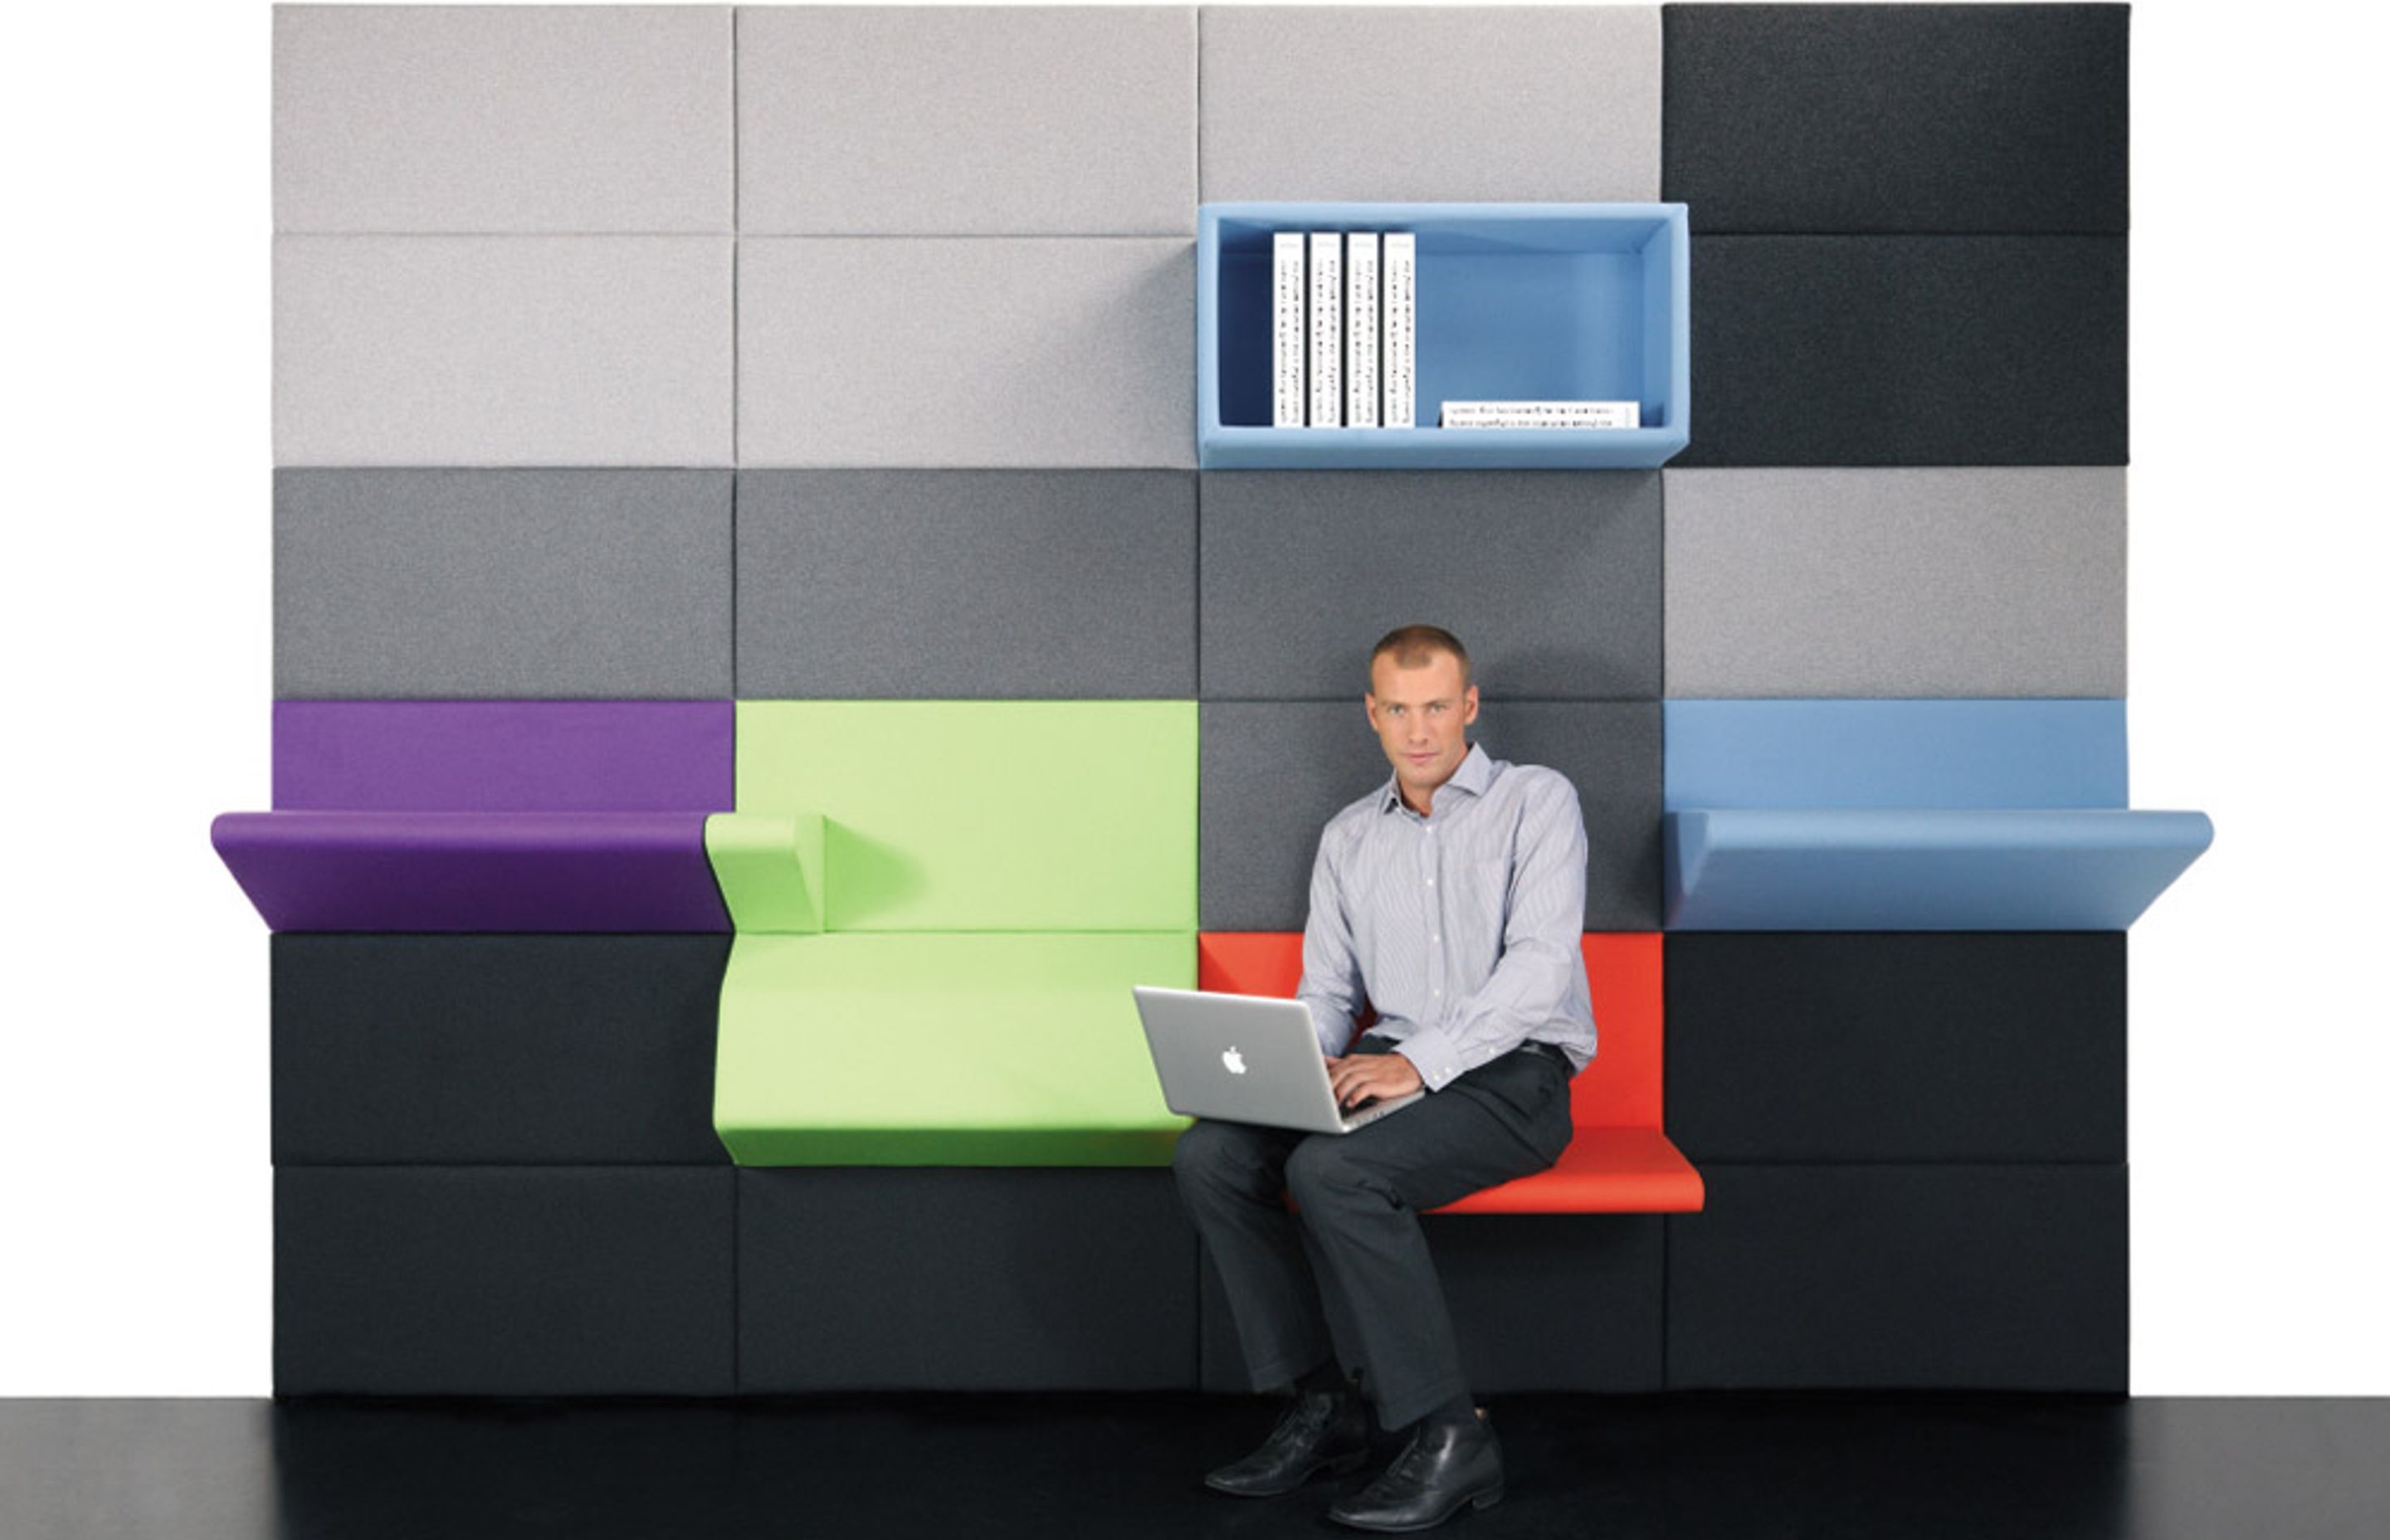 Work space wall ideas